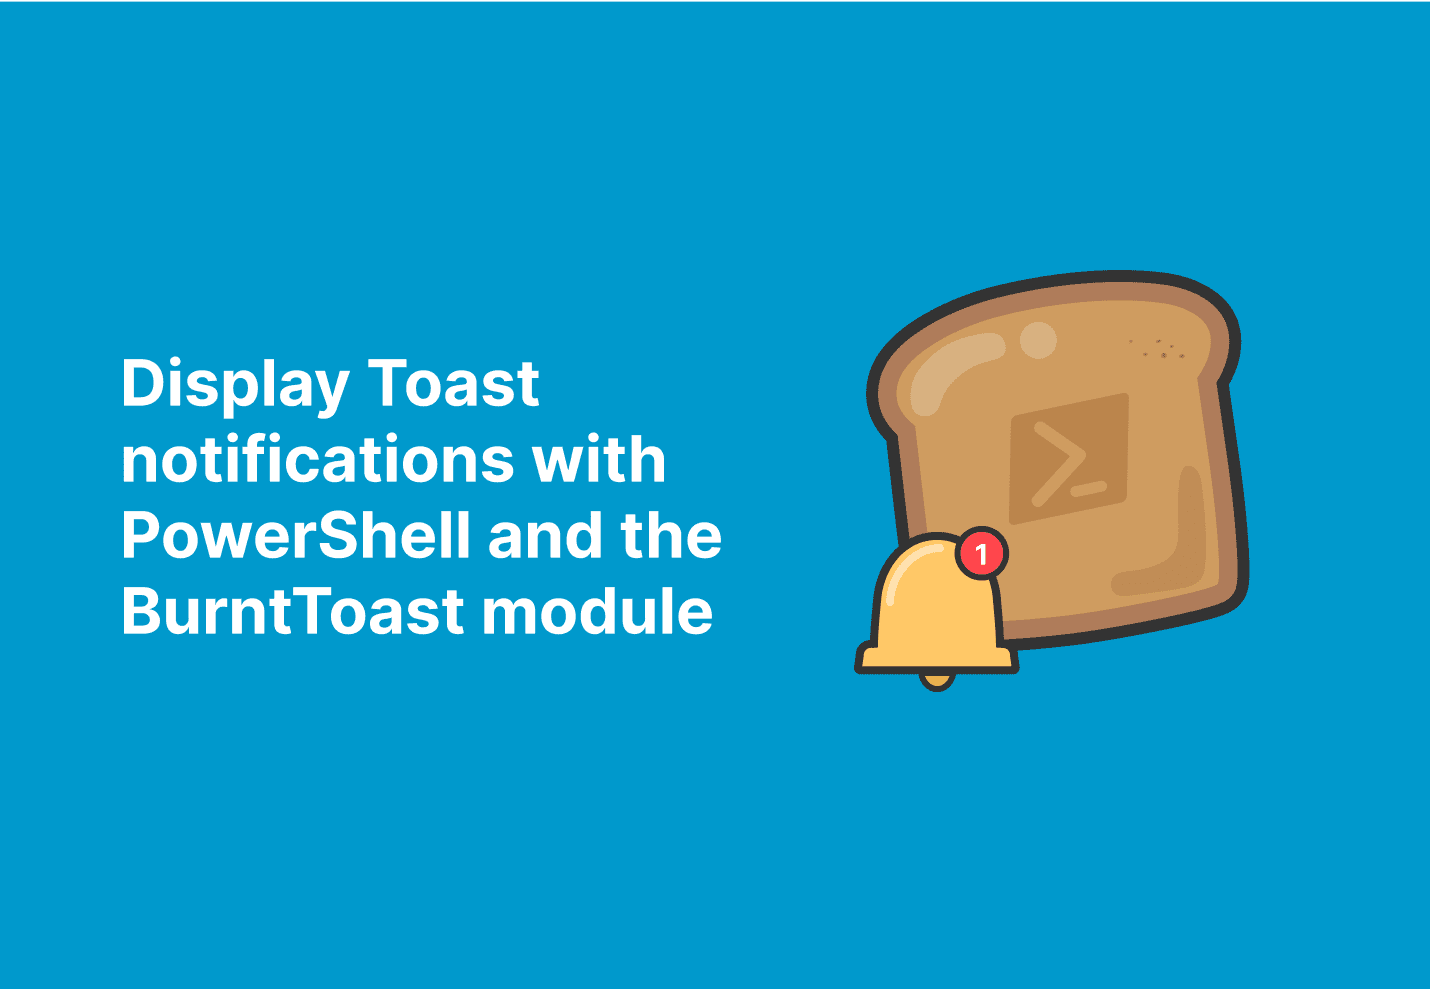 Display Toast notifications with PowerShell and the BurntToast module